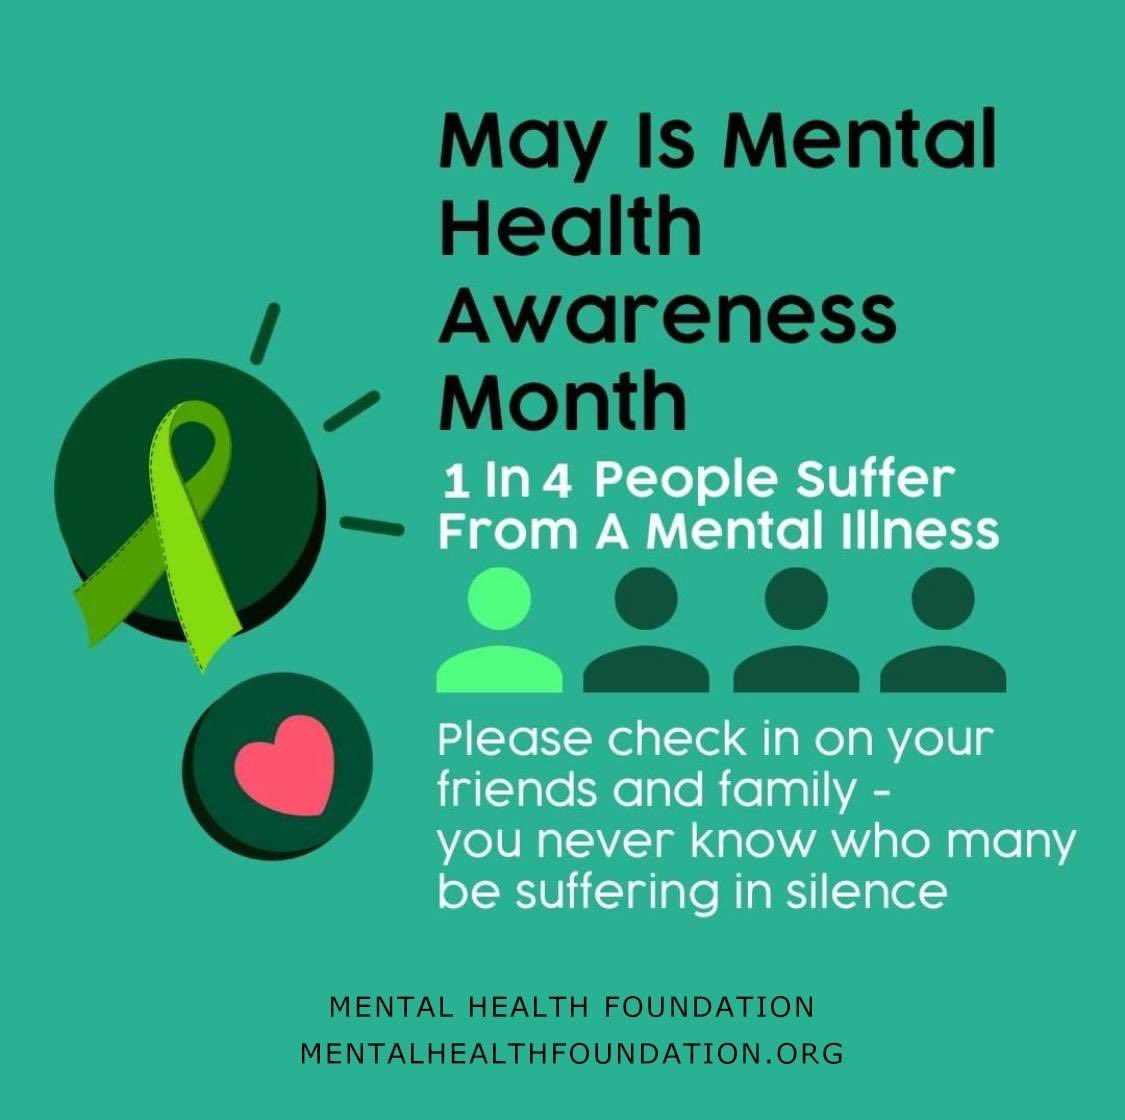 May is Mental Health Awareness Month. We are grateful for your continued support in raising awareness and helping to break the stigma attached to mental illiness. #MentalHealthAwareness #MentalHealthAwarenessMonth